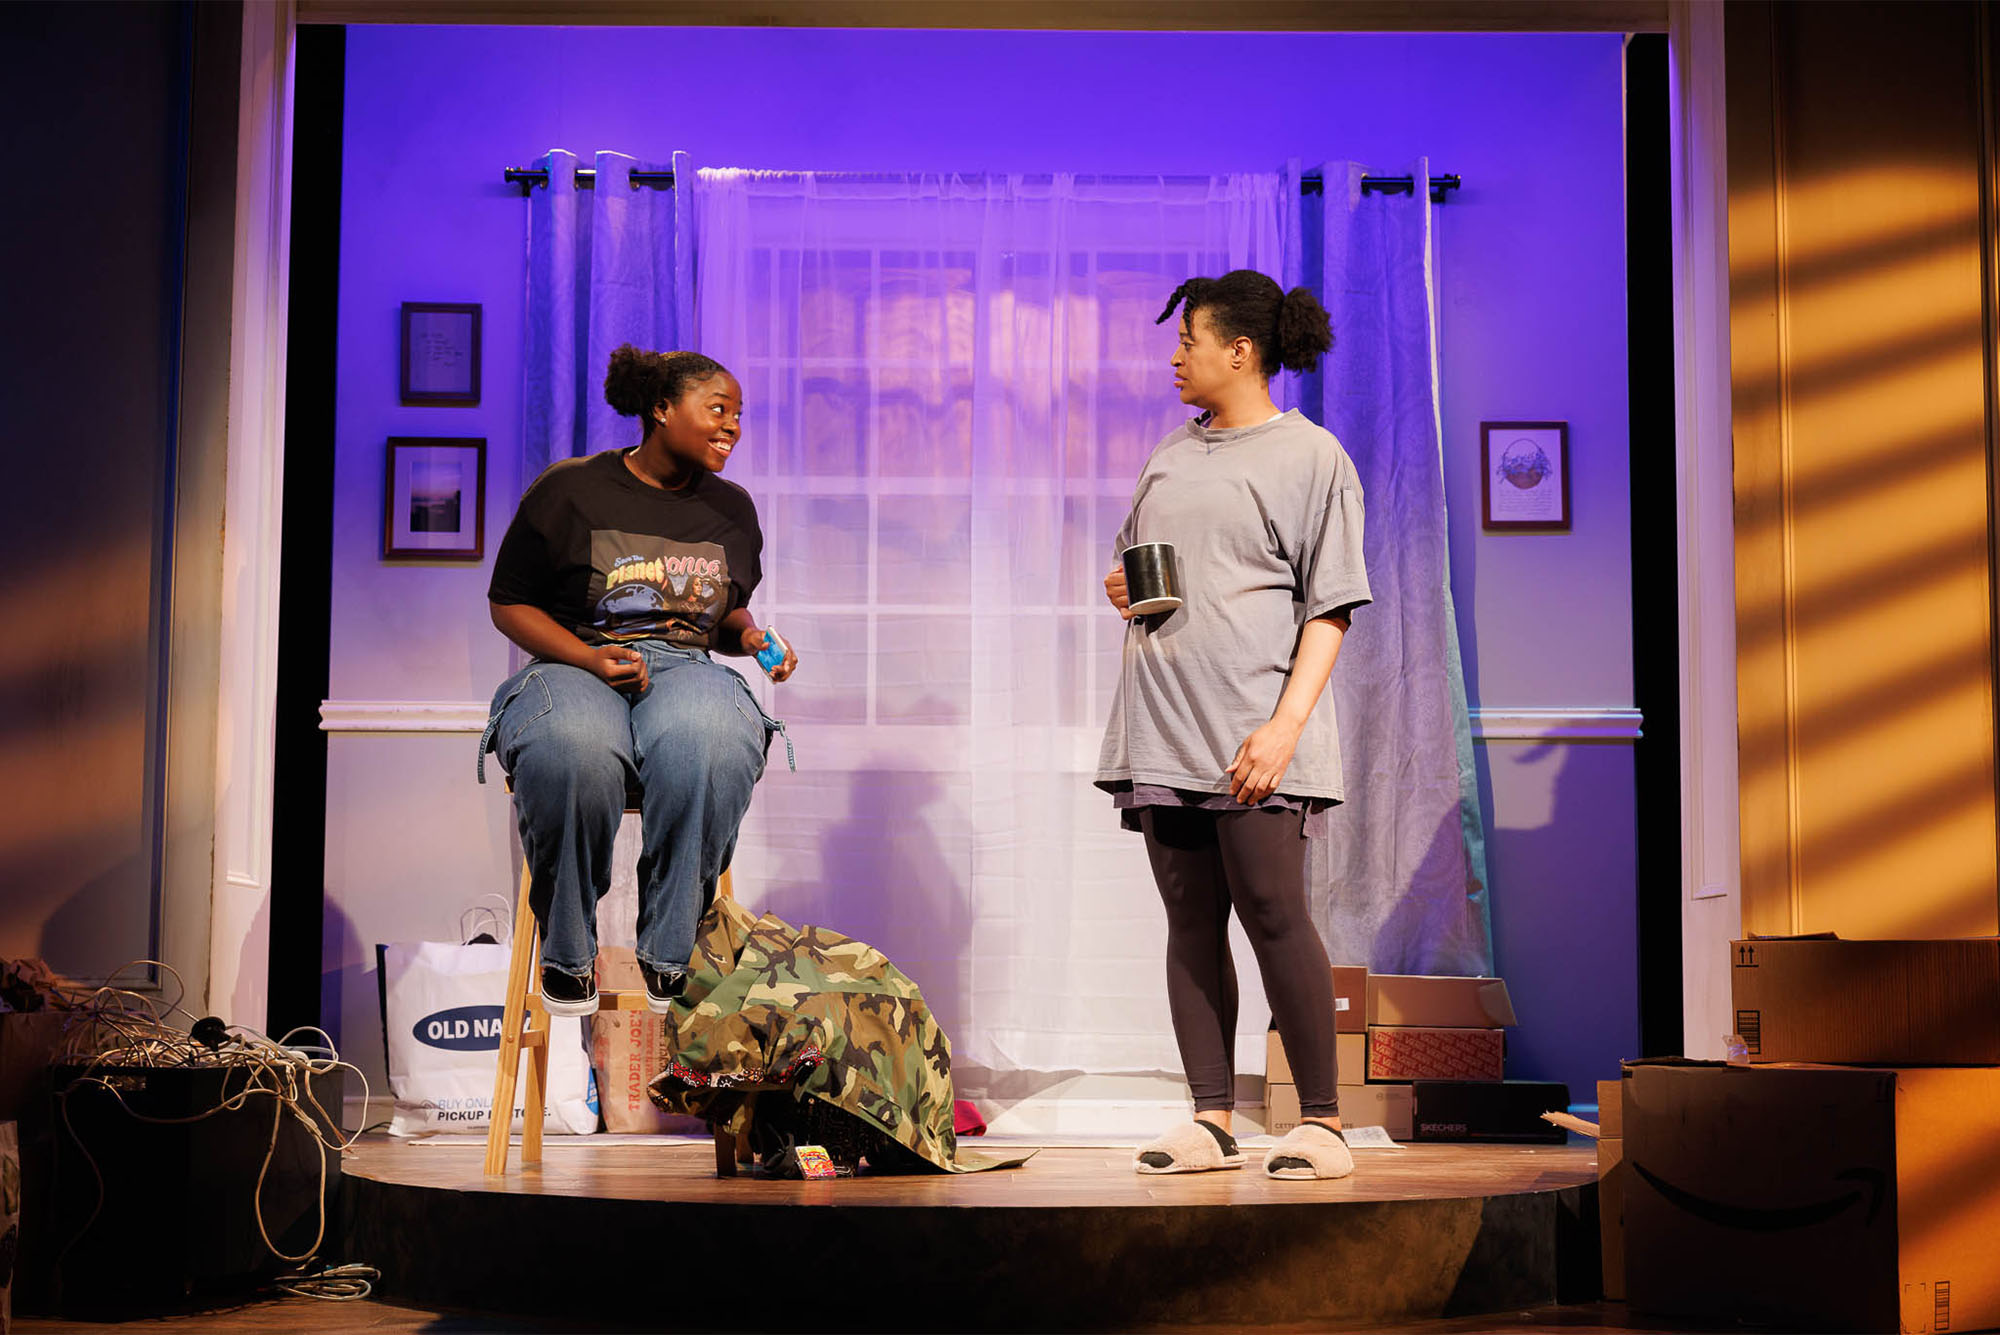 Jackson (left) and Kaili Y. Turner play Dailyn and Mia, a daughter and mother struggling to connect, in Kirsten Greenidge’s Morning, Noon, and Night, a Company One production with Boston University. Photo by Ken Yotsukura